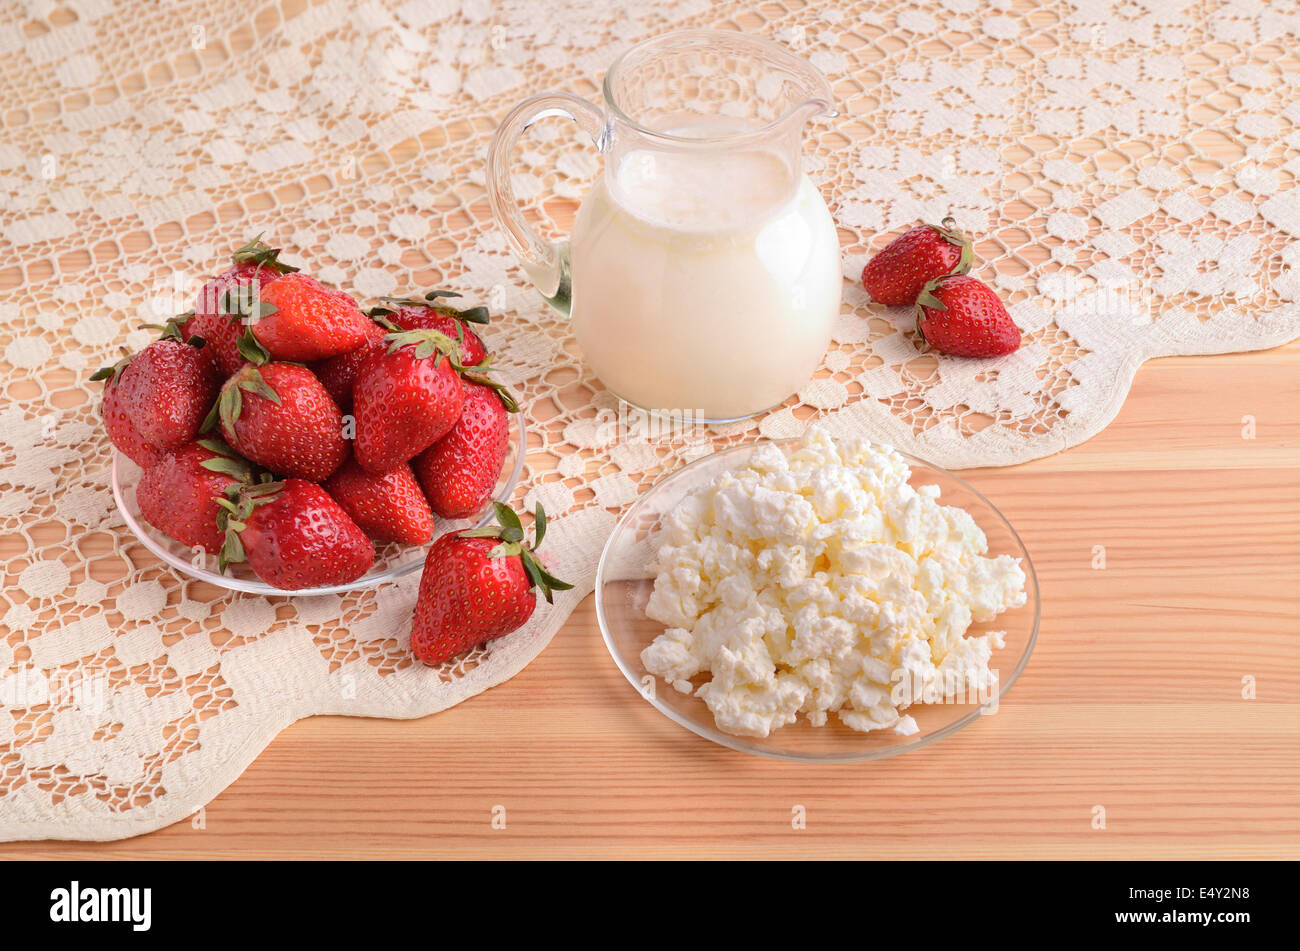 Strawberries, milk and cottage cheese Stock Photo